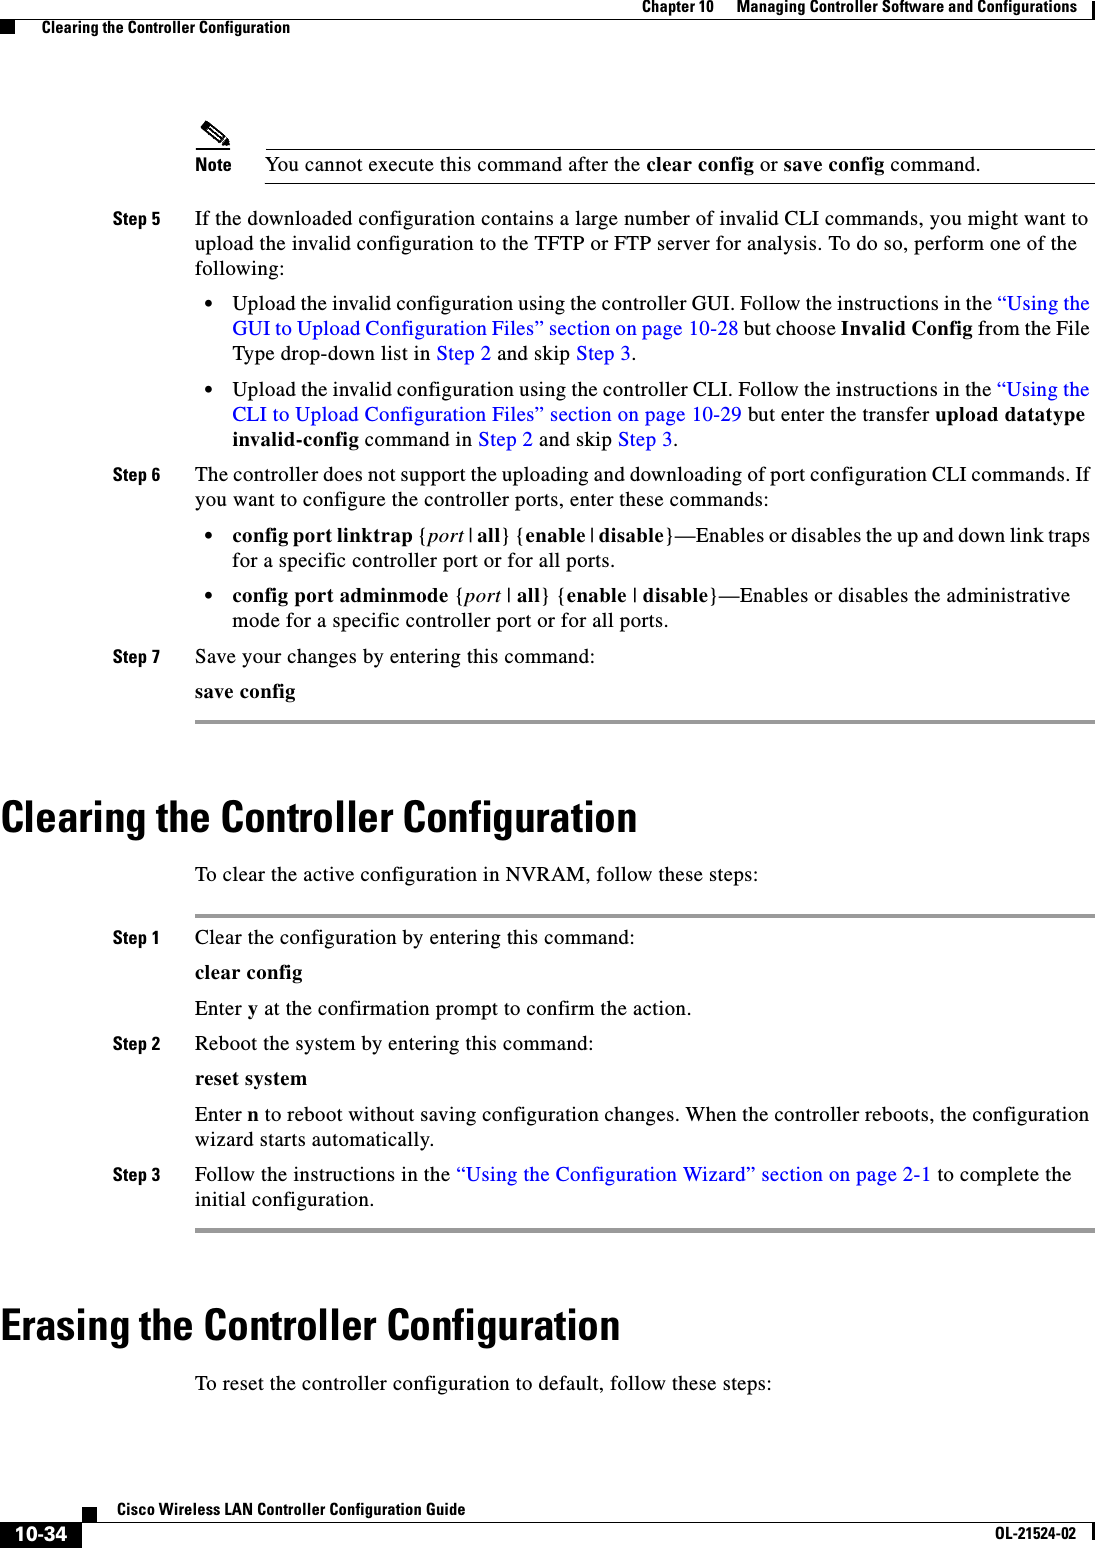  10-34Cisco Wireless LAN Controller Configuration GuideOL-21524-02Chapter 10      Managing Controller Software and Configurations  Clearing the Controller ConfigurationNote You cannot execute this command after the clear config or save config command.Step 5 If the downloaded configuration contains a large number of invalid CLI commands, you might want to upload the invalid configuration to the TFTP or FTP server for analysis. To do so, perform one of the following:  • Upload the invalid configuration using the controller GUI. Follow the instructions in the “Using the GUI to Upload Configuration Files” section on page 10-28 but choose Invalid Config from the File Type drop-down list in Step 2 and skip Step 3.  • Upload the invalid configuration using the controller CLI. Follow the instructions in the “Using the CLI to Upload Configuration Files” section on page 10-29 but enter the transfer upload datatype invalid-config command in Step 2 and skip Step 3.Step 6 The controller does not support the uploading and downloading of port configuration CLI commands. If you want to configure the controller ports, enter these commands:  • config port linktrap {port | all} {enable | disable}—Enables or disables the up and down link traps for a specific controller port or for all ports.  • config port adminmode {port | all} {enable | disable}—Enables or disables the administrative mode for a specific controller port or for all ports.Step 7 Save your changes by entering this command:save configClearing the Controller ConfigurationTo clear the active configuration in NVRAM, follow these steps:Step 1 Clear the configuration by entering this command:clear config Enter y at the confirmation prompt to confirm the action.Step 2 Reboot the system by entering this command:reset systemEnter n to reboot without saving configuration changes. When the controller reboots, the configuration wizard starts automatically.Step 3 Follow the instructions in the “Using the Configuration Wizard” section on page 2-1 to complete the initial configuration.Erasing the Controller ConfigurationTo reset the controller configuration to default, follow these steps: